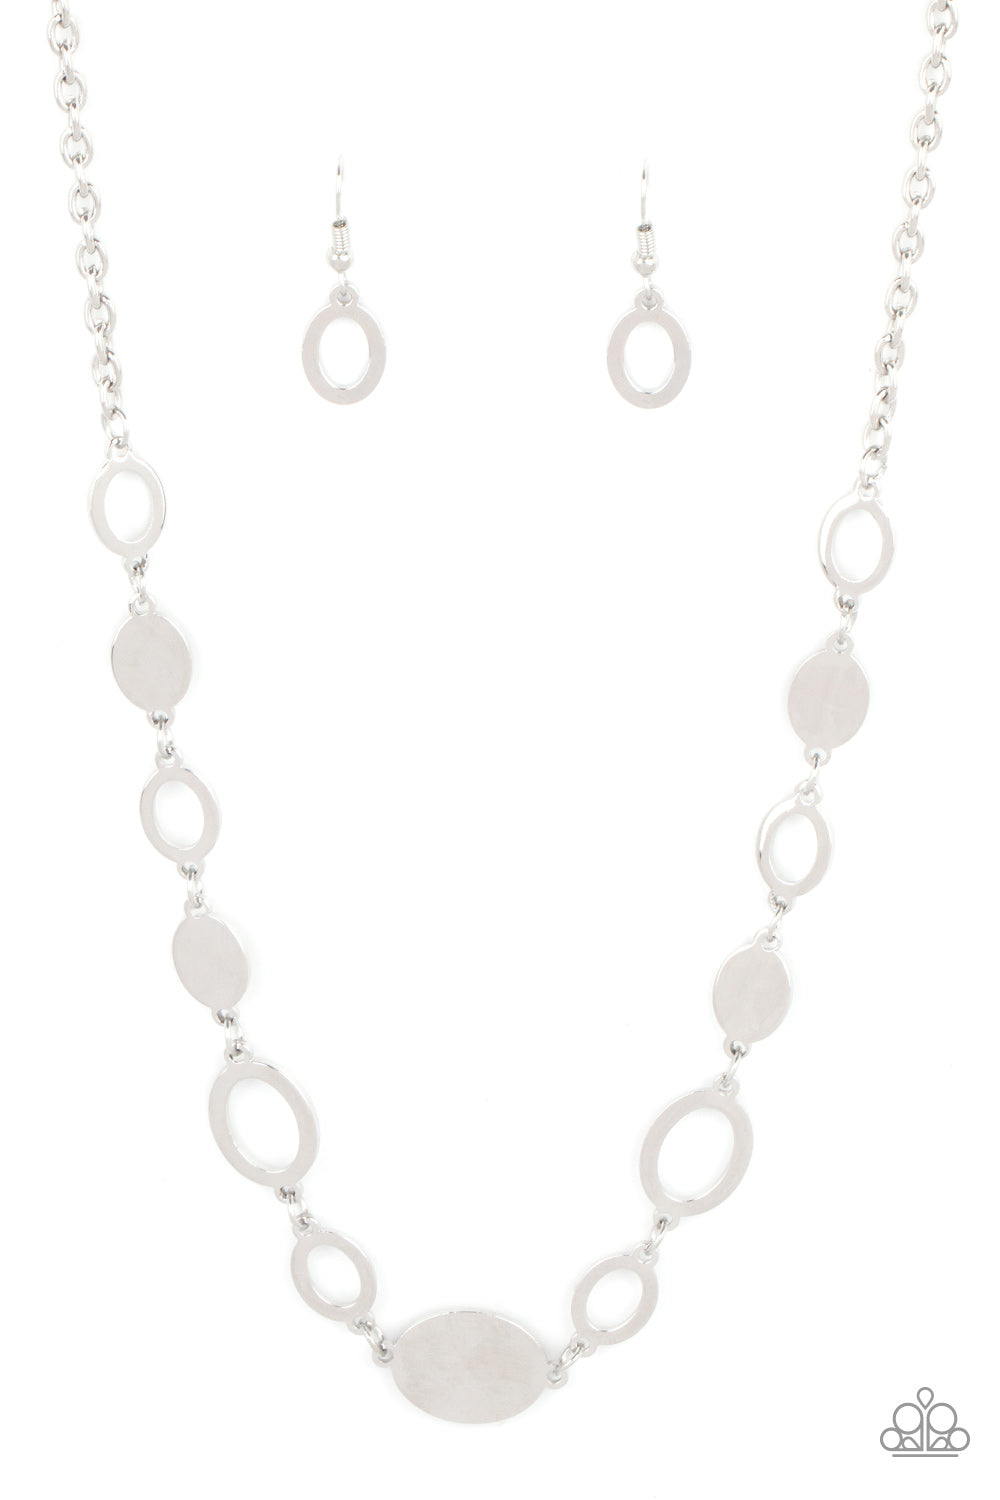 Working OVAL-time - Paparazzi - Silver Disc and Oval Necklace